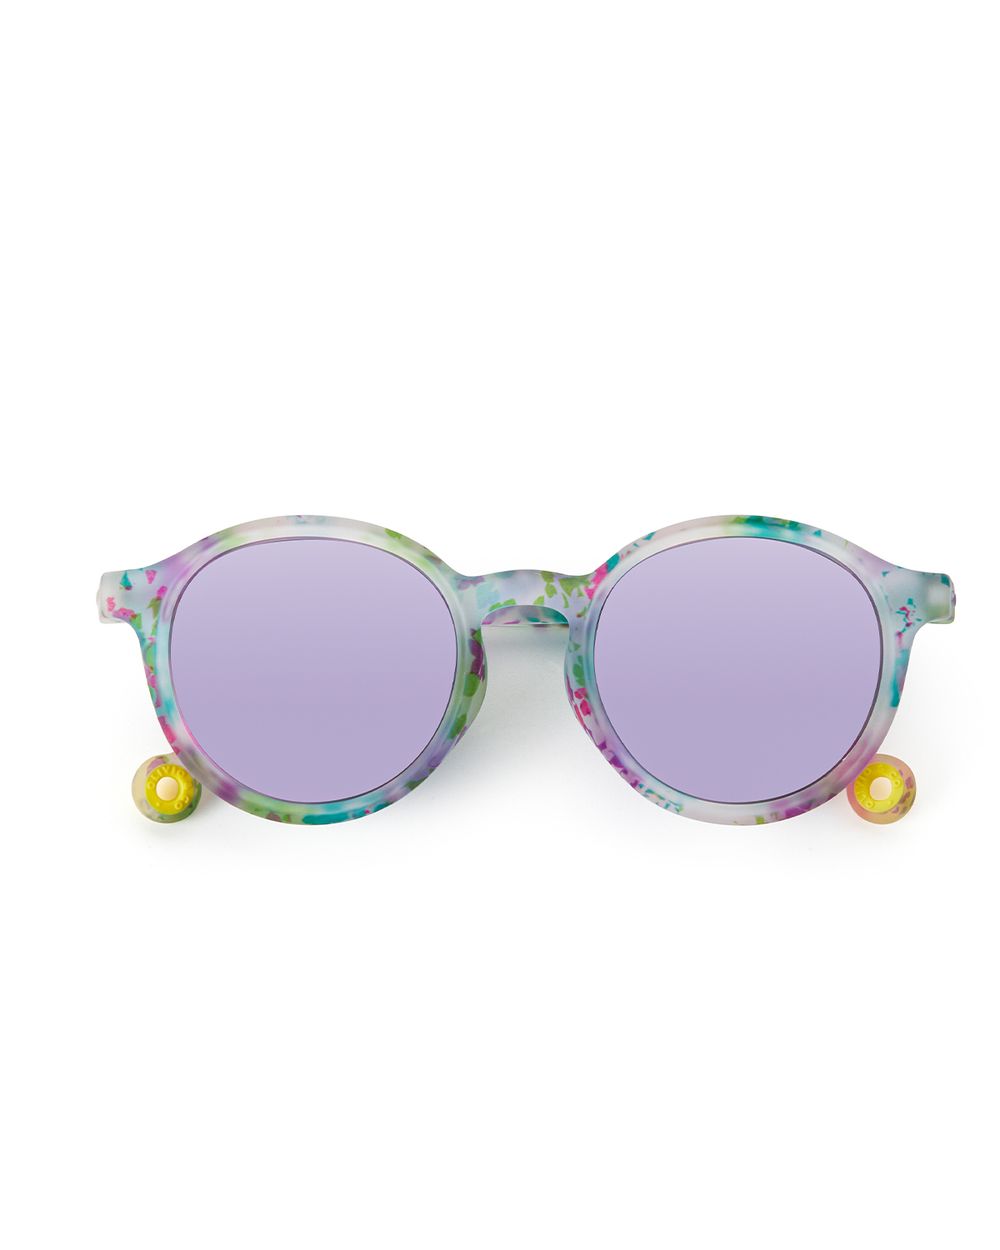 Junior Oval Sunglasses Wild Flower with Non-Polarized